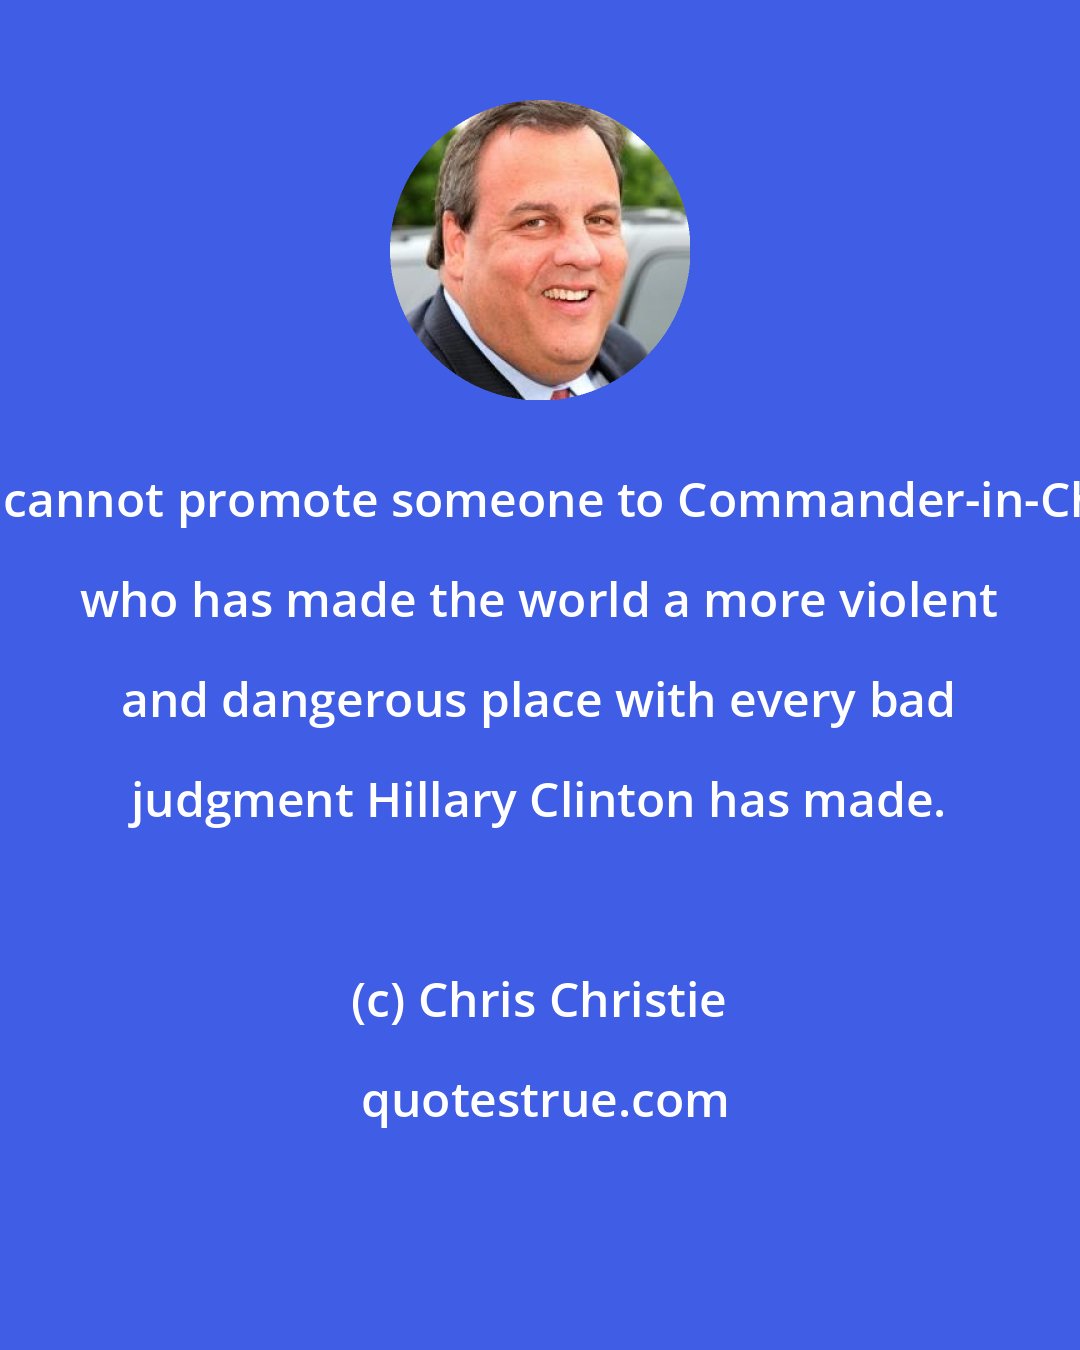 Chris Christie: We cannot promote someone to Commander-in-Chief who has made the world a more violent and dangerous place with every bad judgment Hillary Clinton has made.